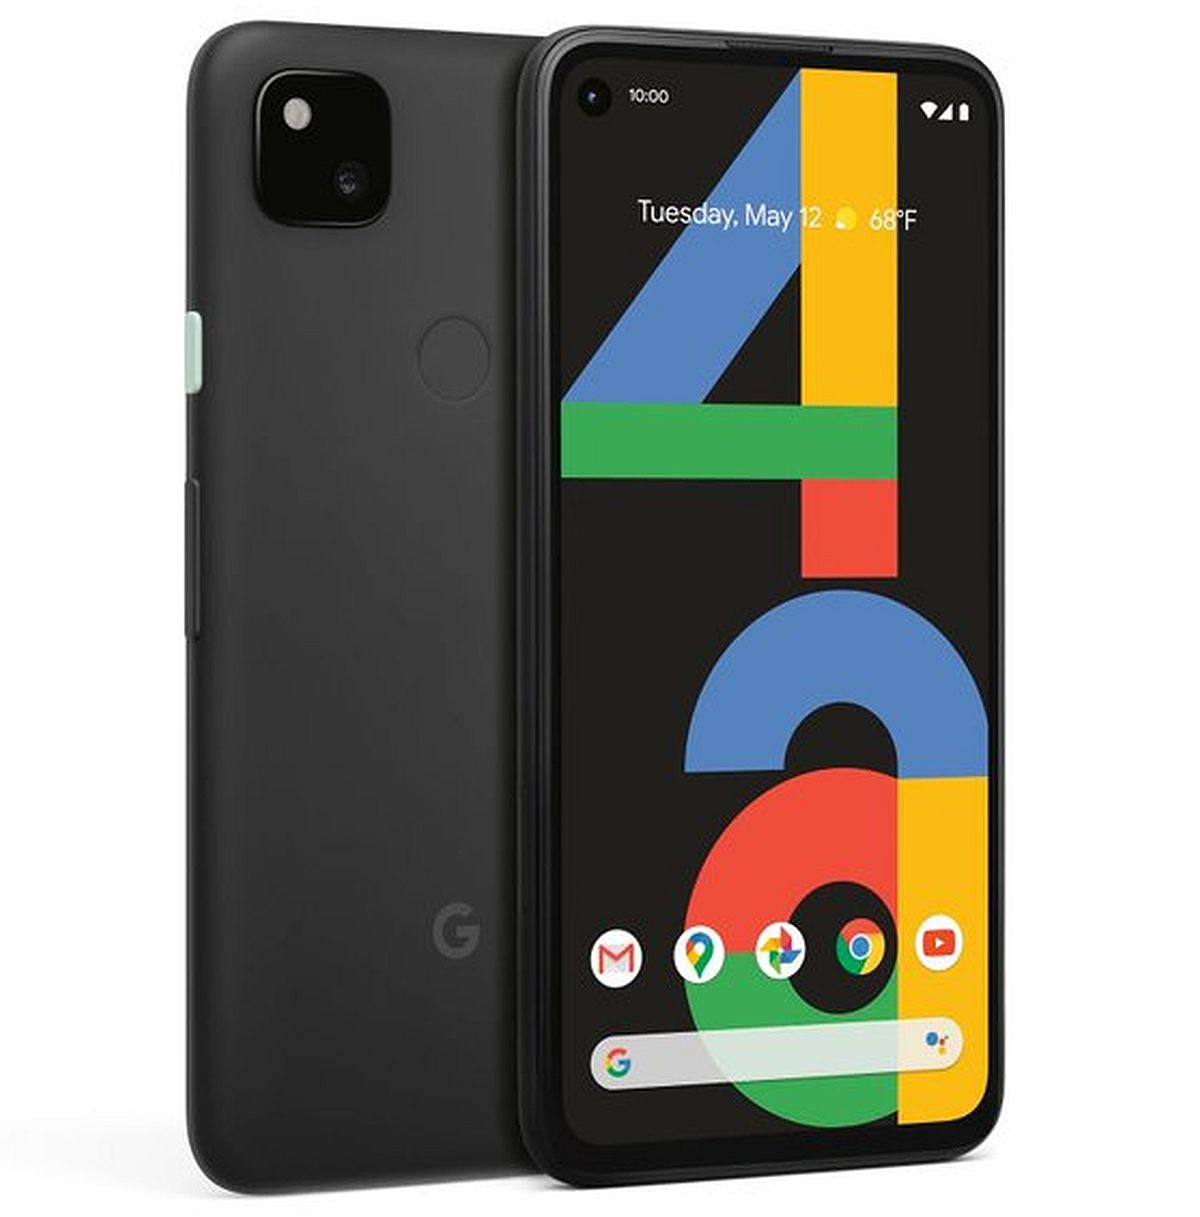 Google to bring Pixel 4a to India in Oct - Rediff.com